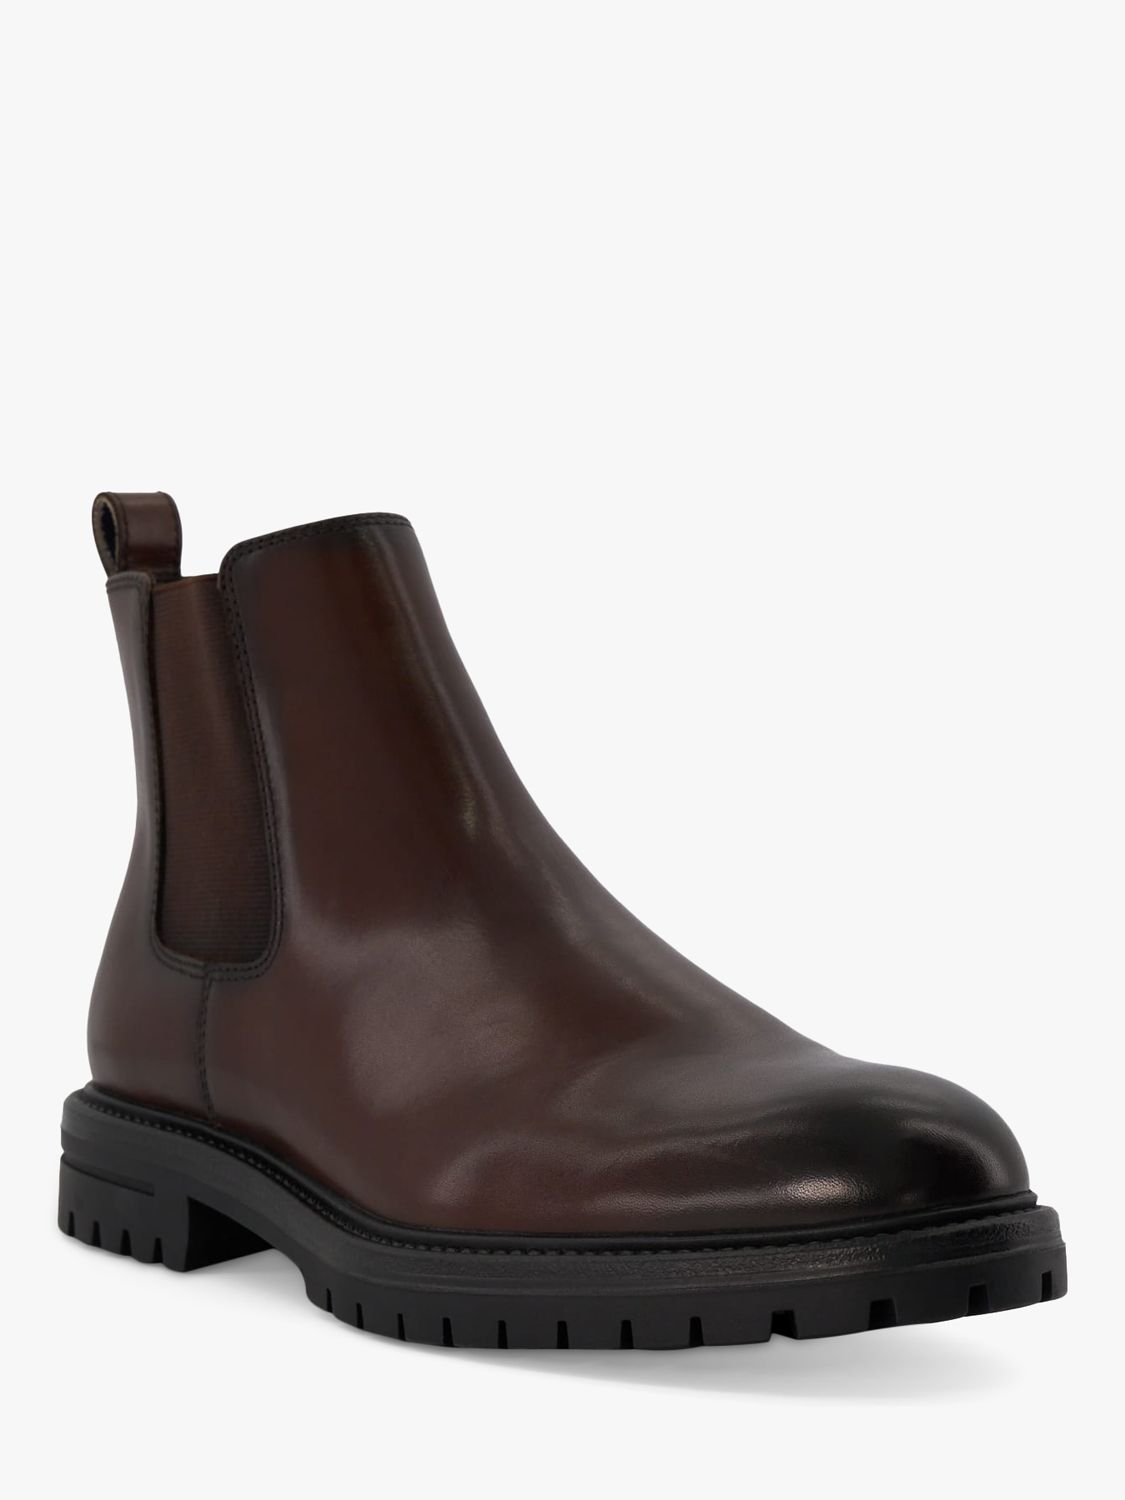 Dune Created Leather Chelsea Boots, Black, Brown at John Lewis & Partners